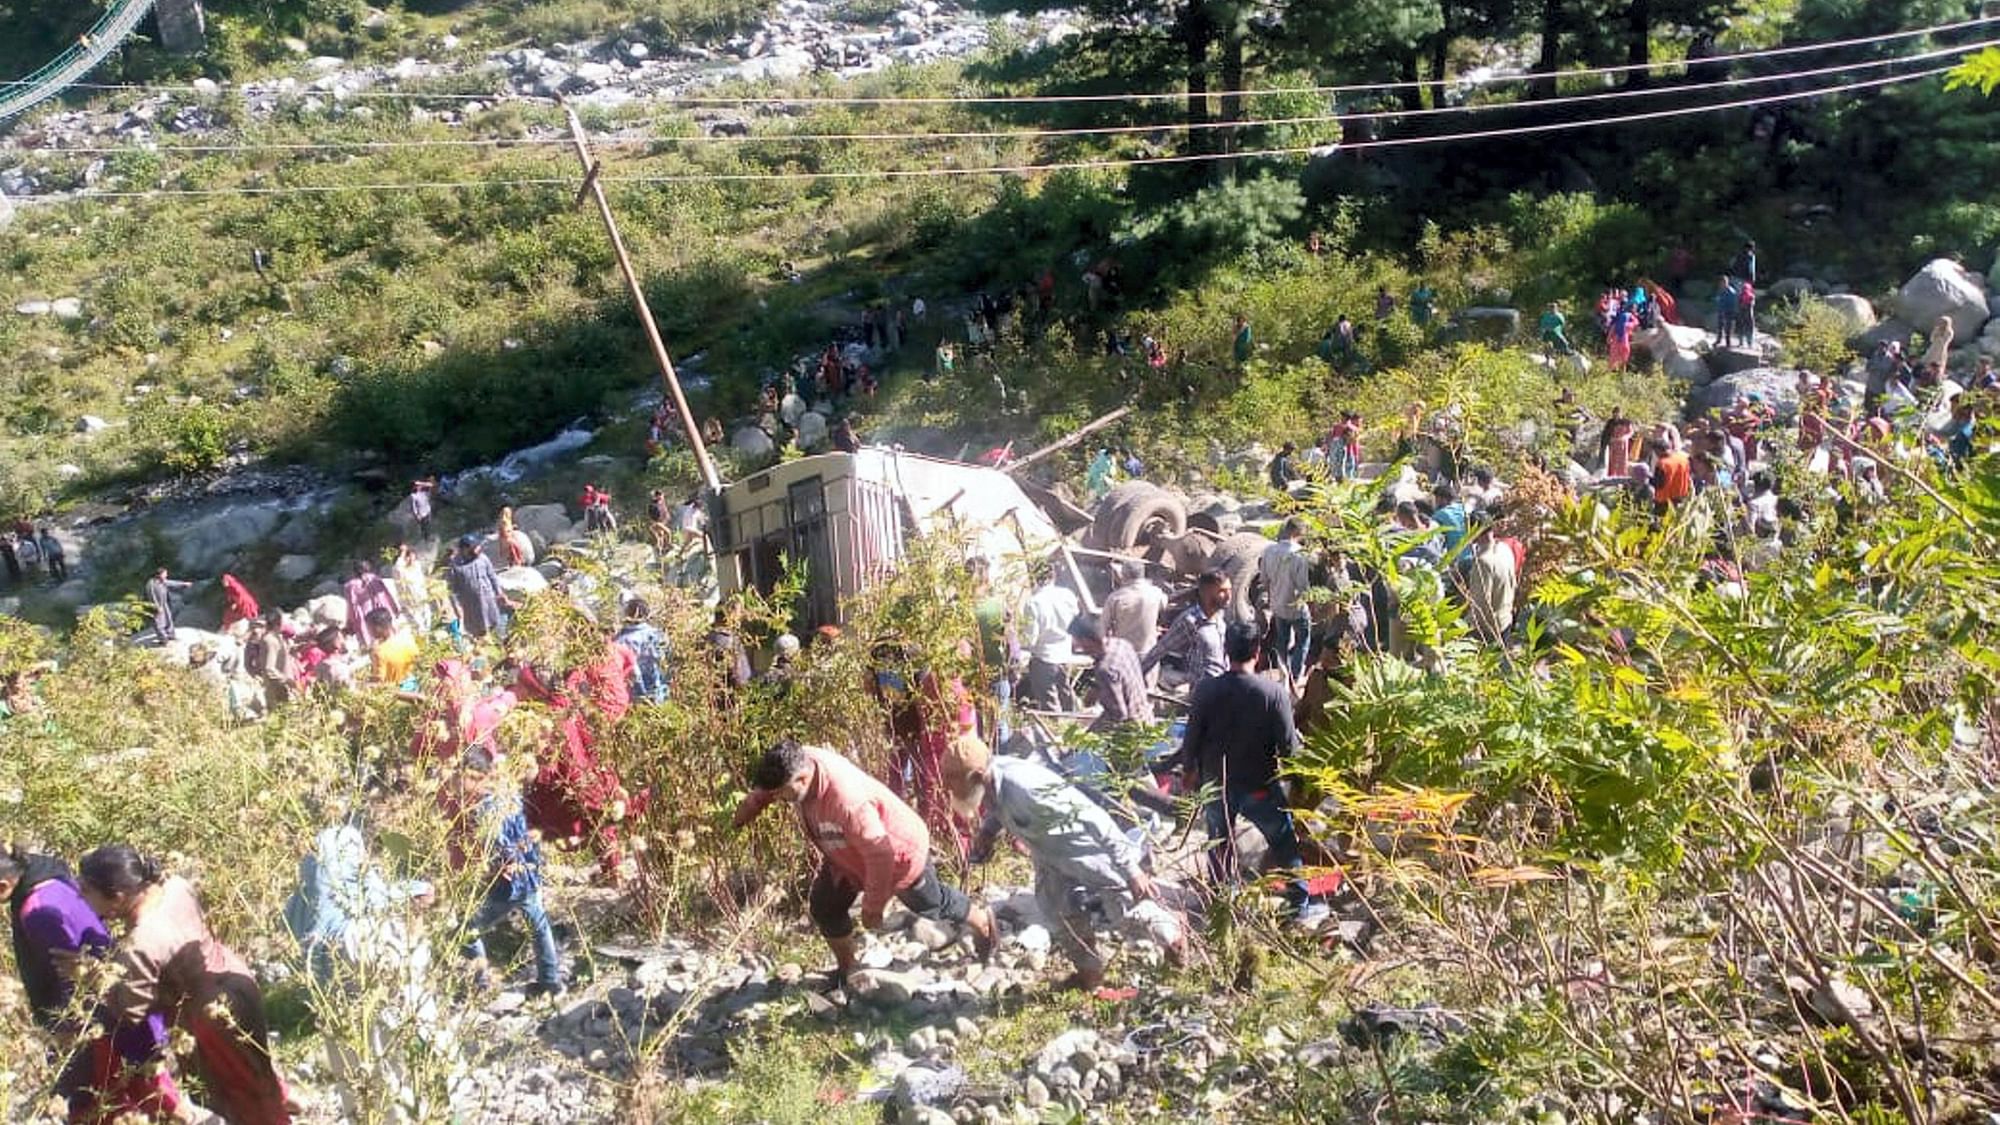 <div class="paragraphs"><p>Poonch: A rescue operation is being conducted after a passenger bus fell into a gorge near the Bareri Nallah in Poonch district on Wednesday, 14 September. Several people are feared dead.</p></div>